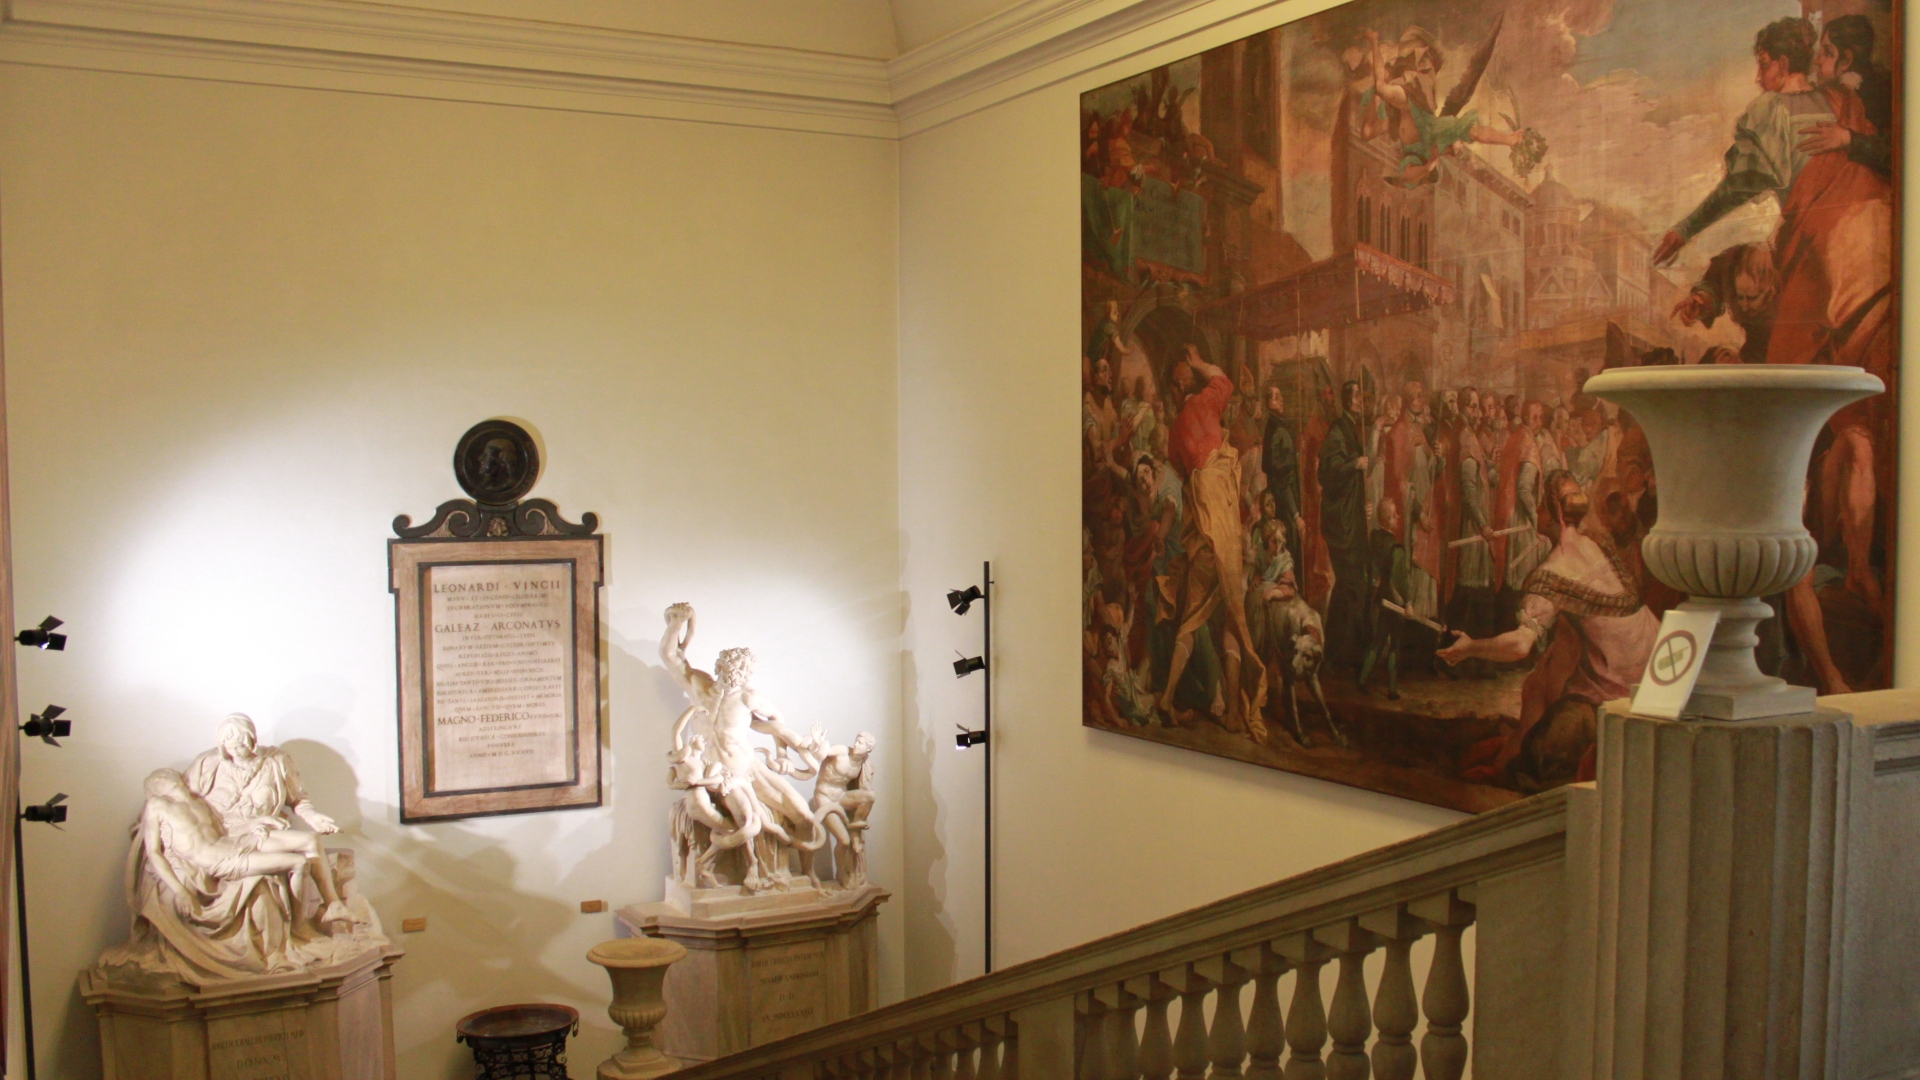 NEW PINACOTECA OPENING HOURS FROM JULY 1